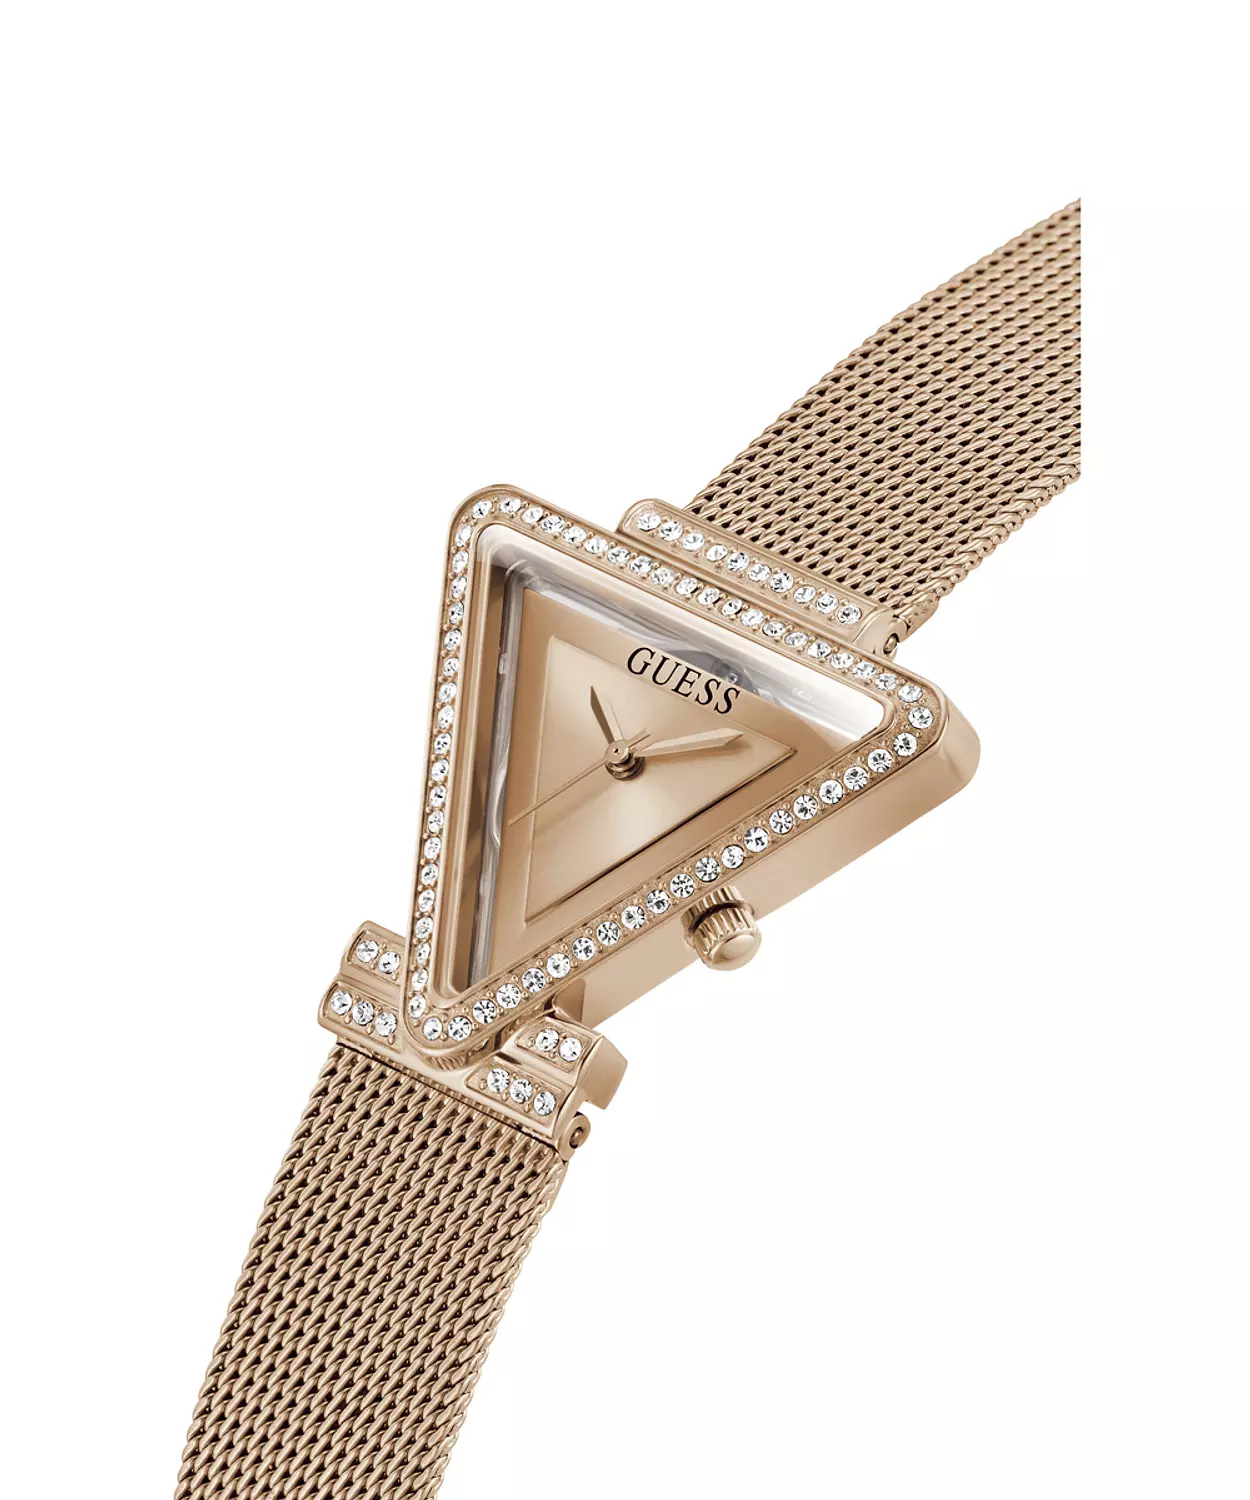 GUESS GW0508L3 ANALOG WATCH  For Women Rose Gold Stainless Steel/Mesh Polished Bracelet  3